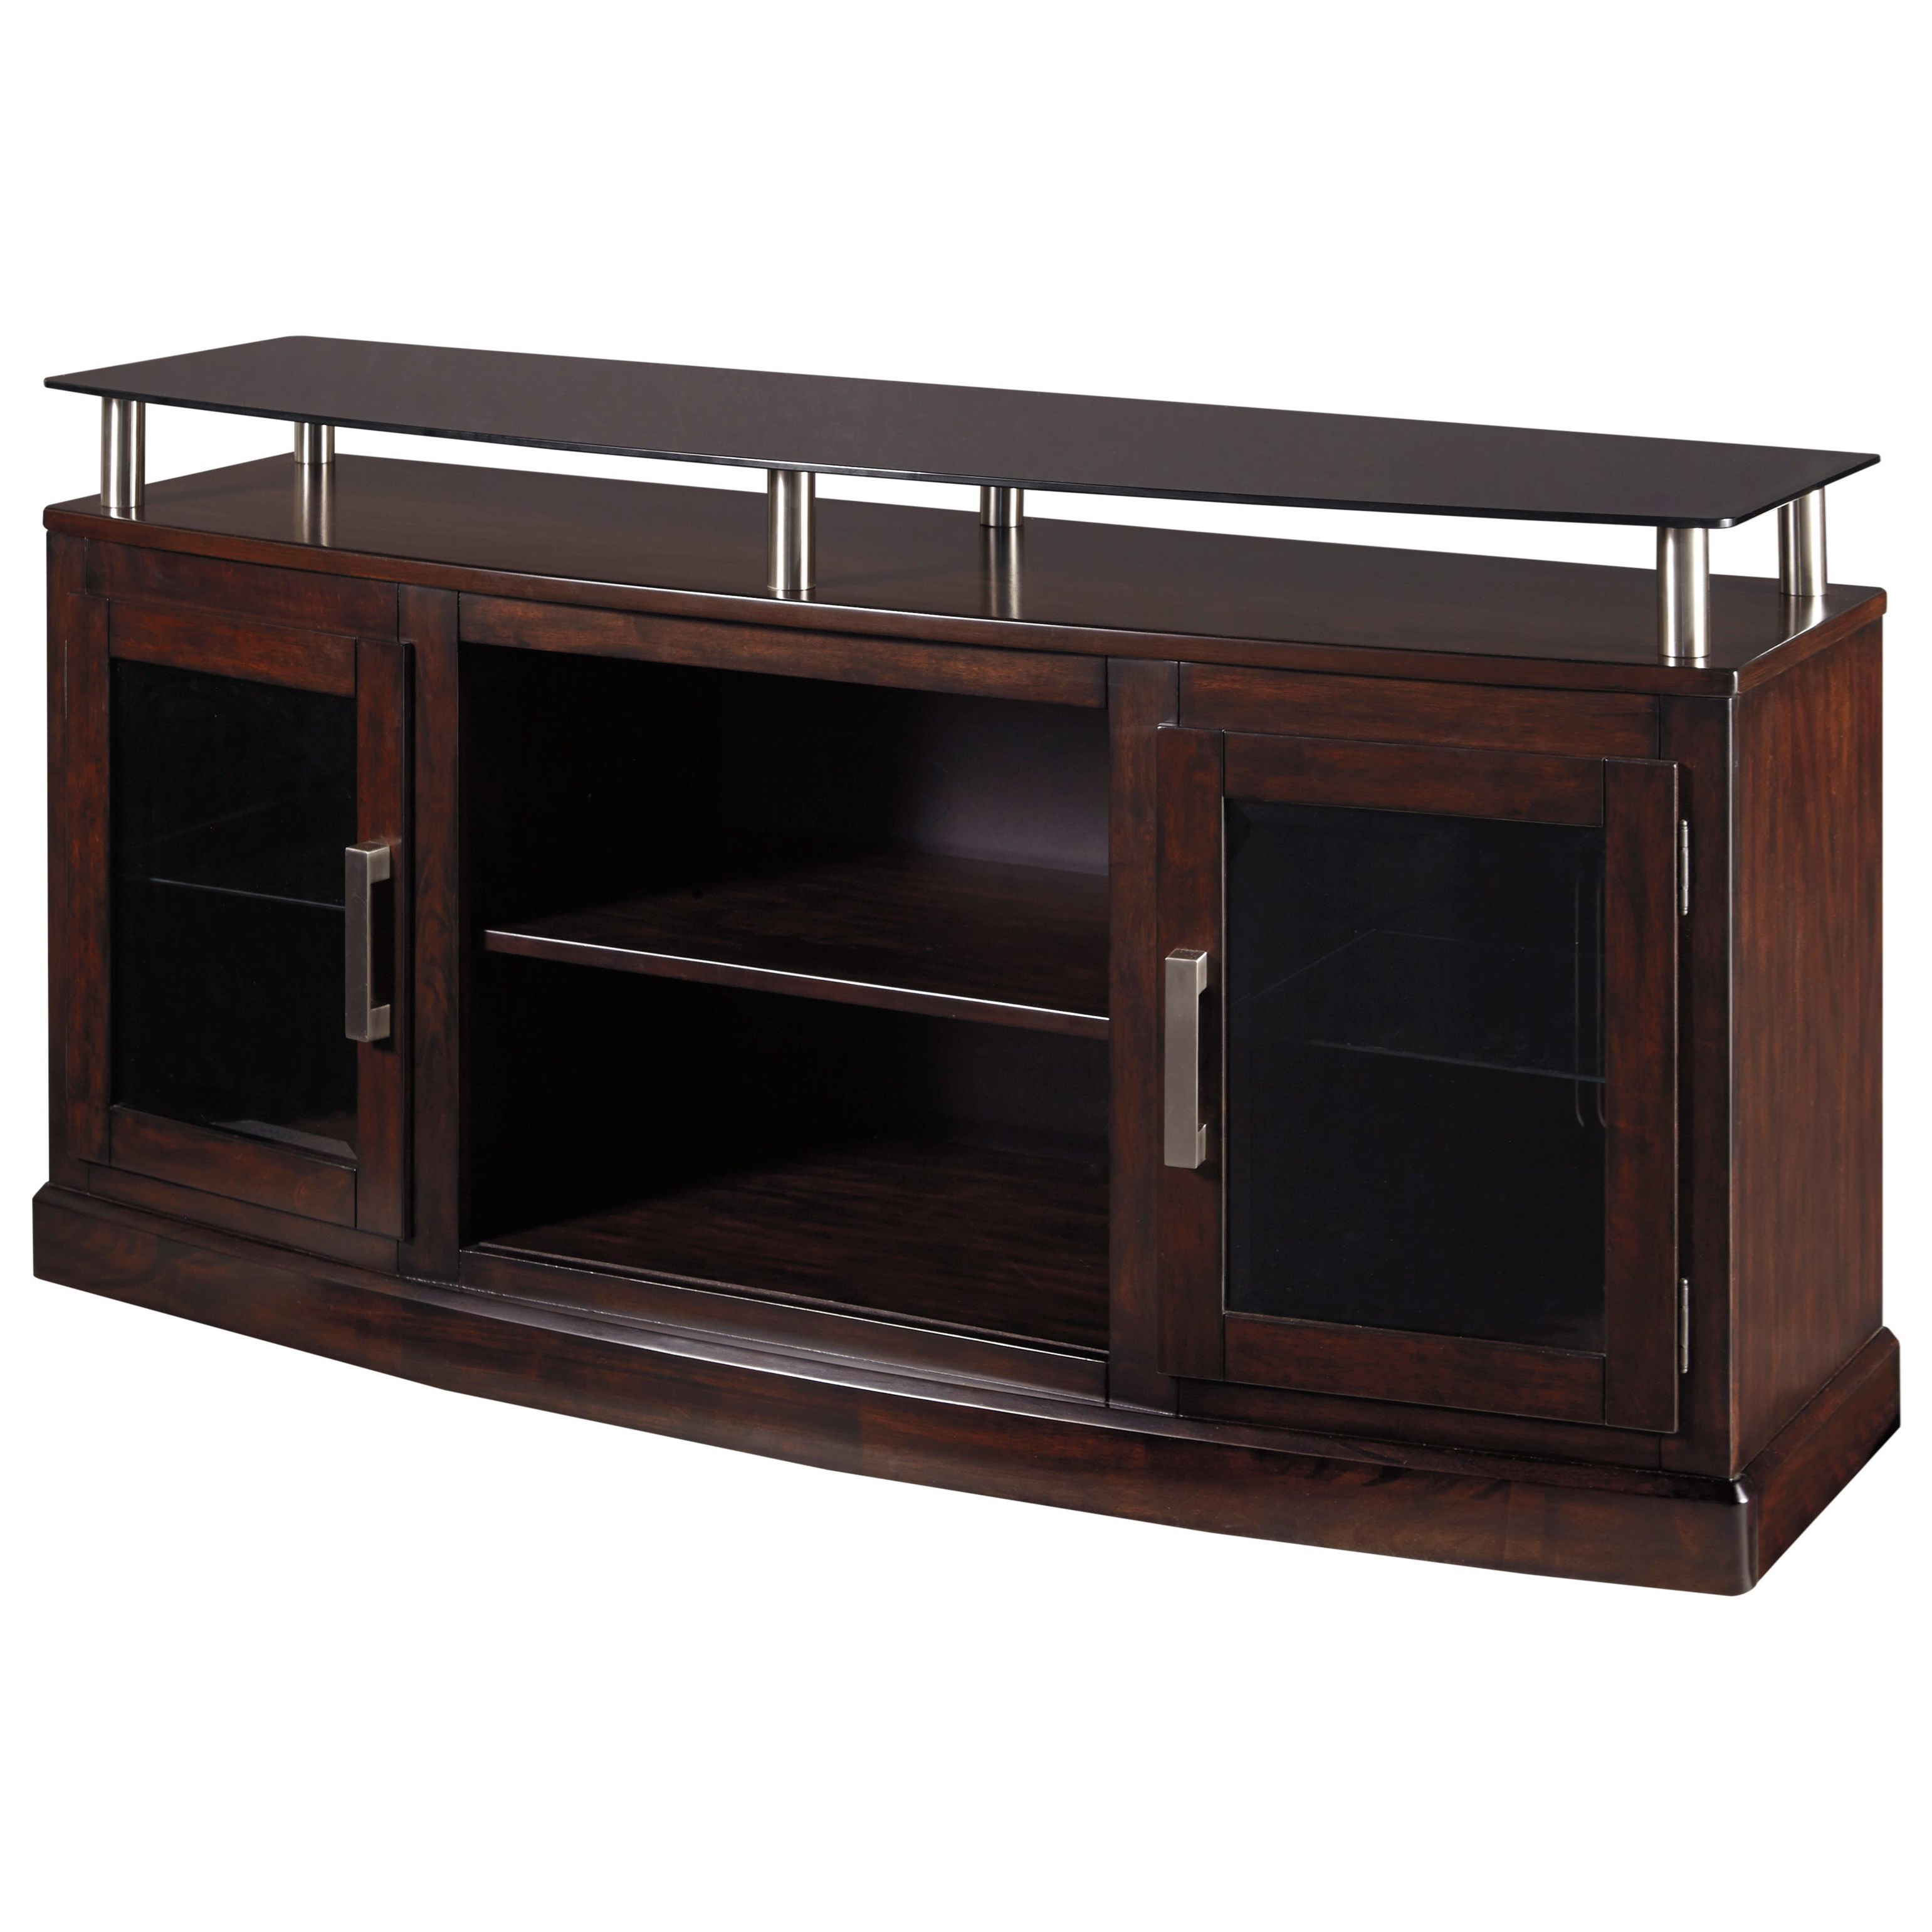 Sauder Tv Stand with Fireplace Lovely Tv Stands Allegro Television Stand with Fireplace Jumia